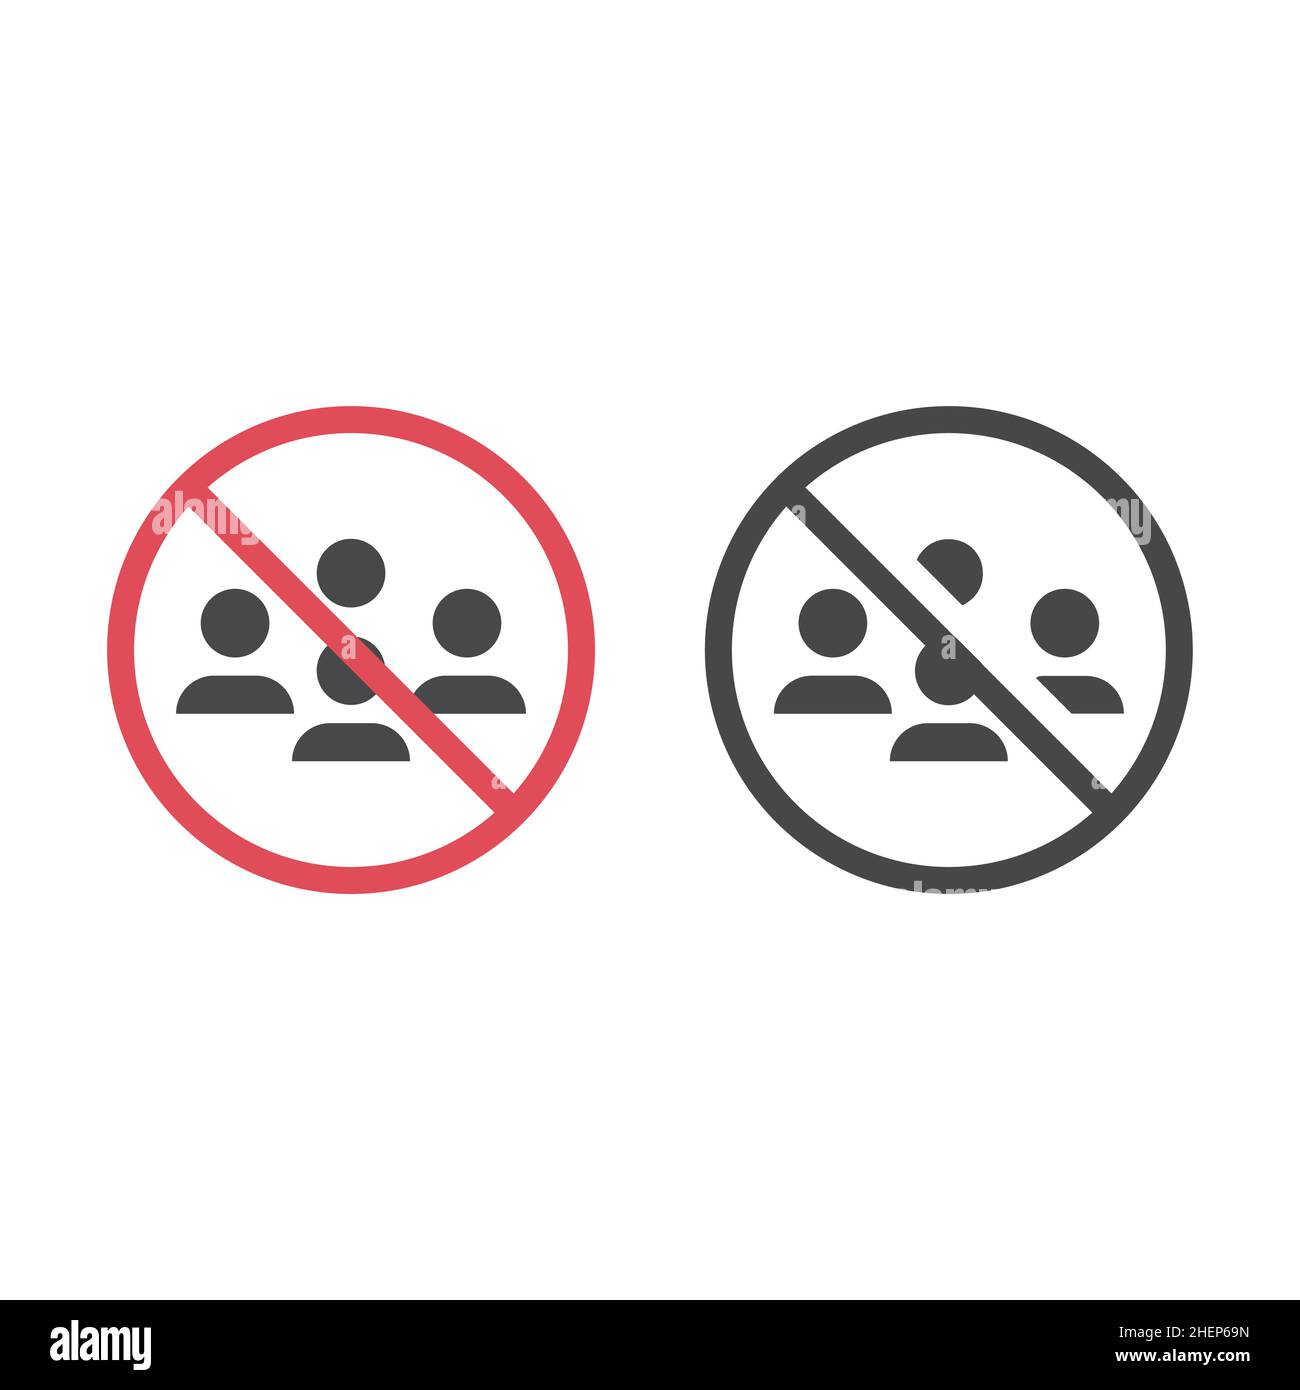 No public or mass gathering prohibition sign. Social distancing filled vector icon, no crowds. Stock Vector